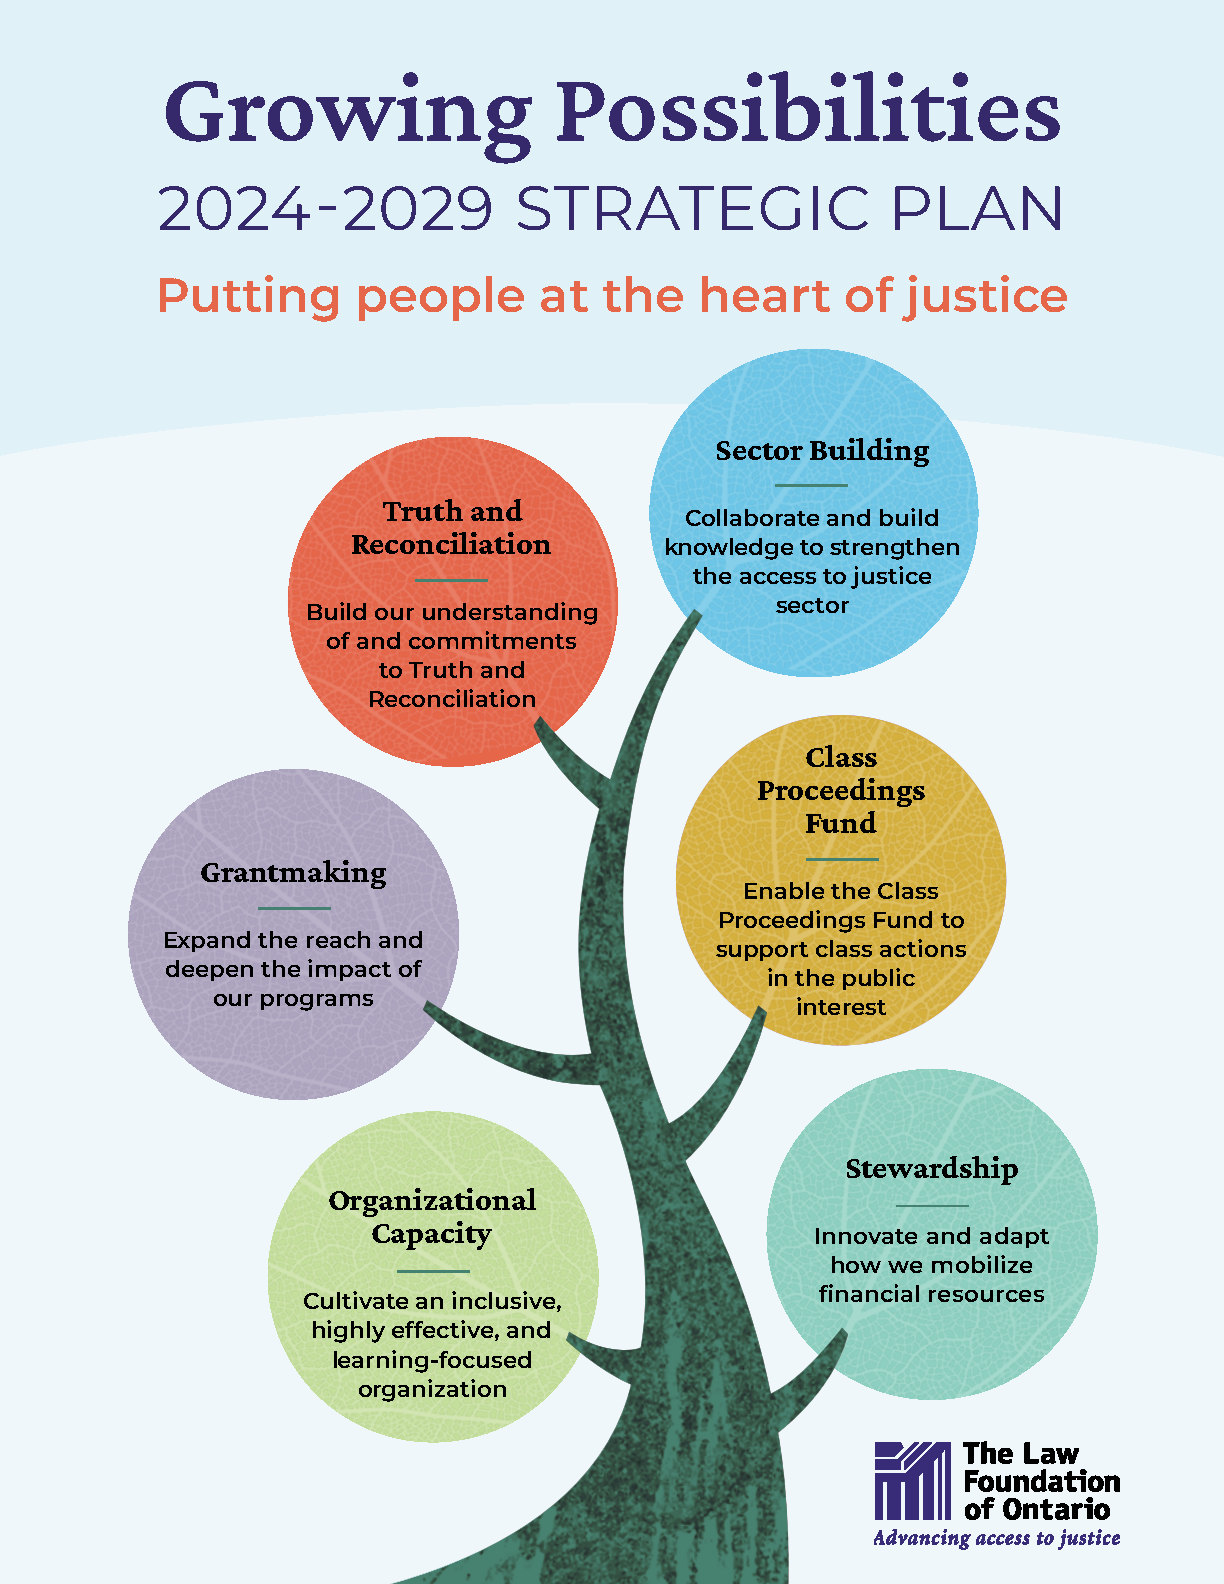 Colourful illustration of a tree with 6 circles representing strategic pillars with text that says "Growing Possibilities, 2024-2029 Strategic Plan"